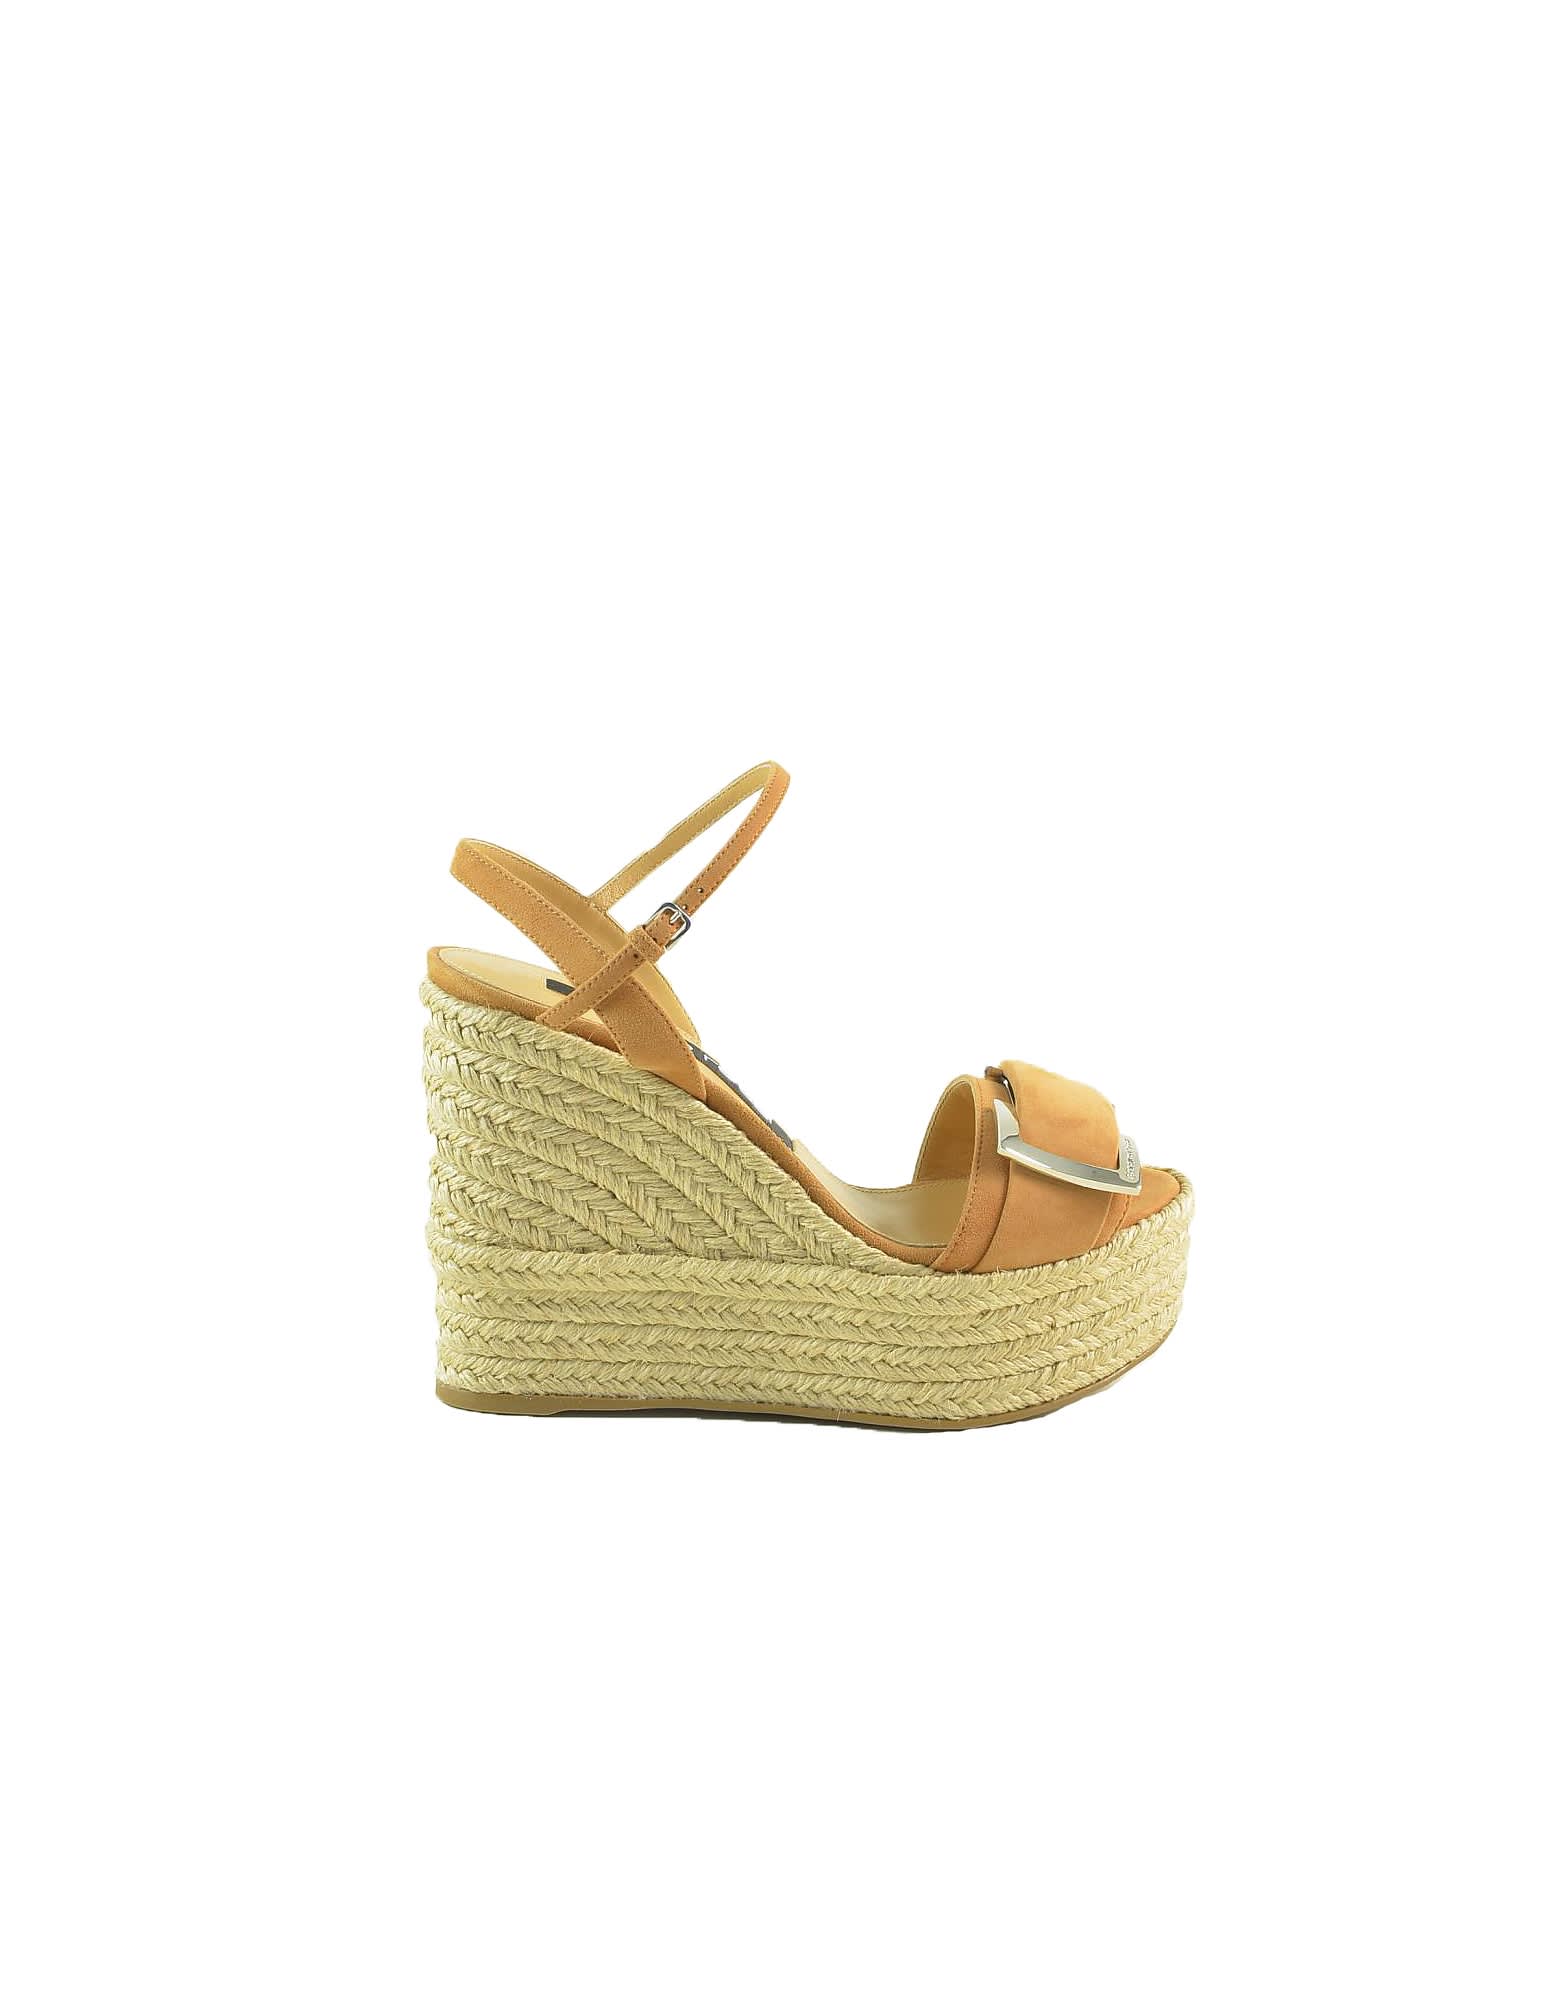 Sergio Rossi Brown Suede And Woven Jute Wedge Sandals